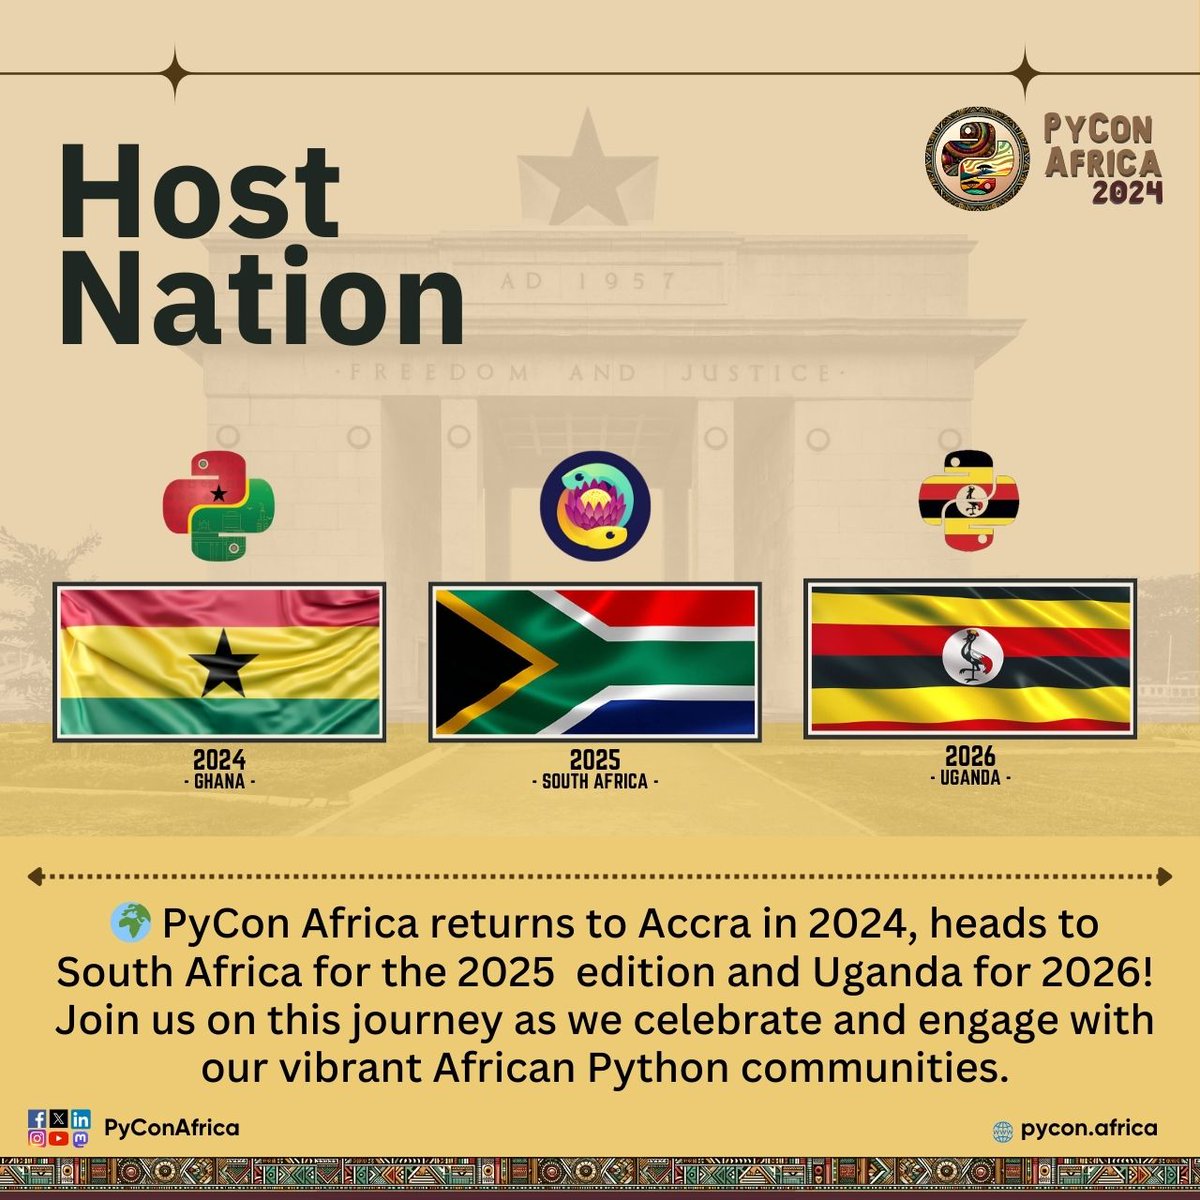 🎉 Big news, Pythonistas! 🐍 We've got some updates: #PyConAfrica is back, and we're kicking off in Accra again before heading south to South Africa in 2025 and then catching the beat in Uganda in 2026! Let's gear up for a Pythonic journey like no other! #PyConAfrica2024